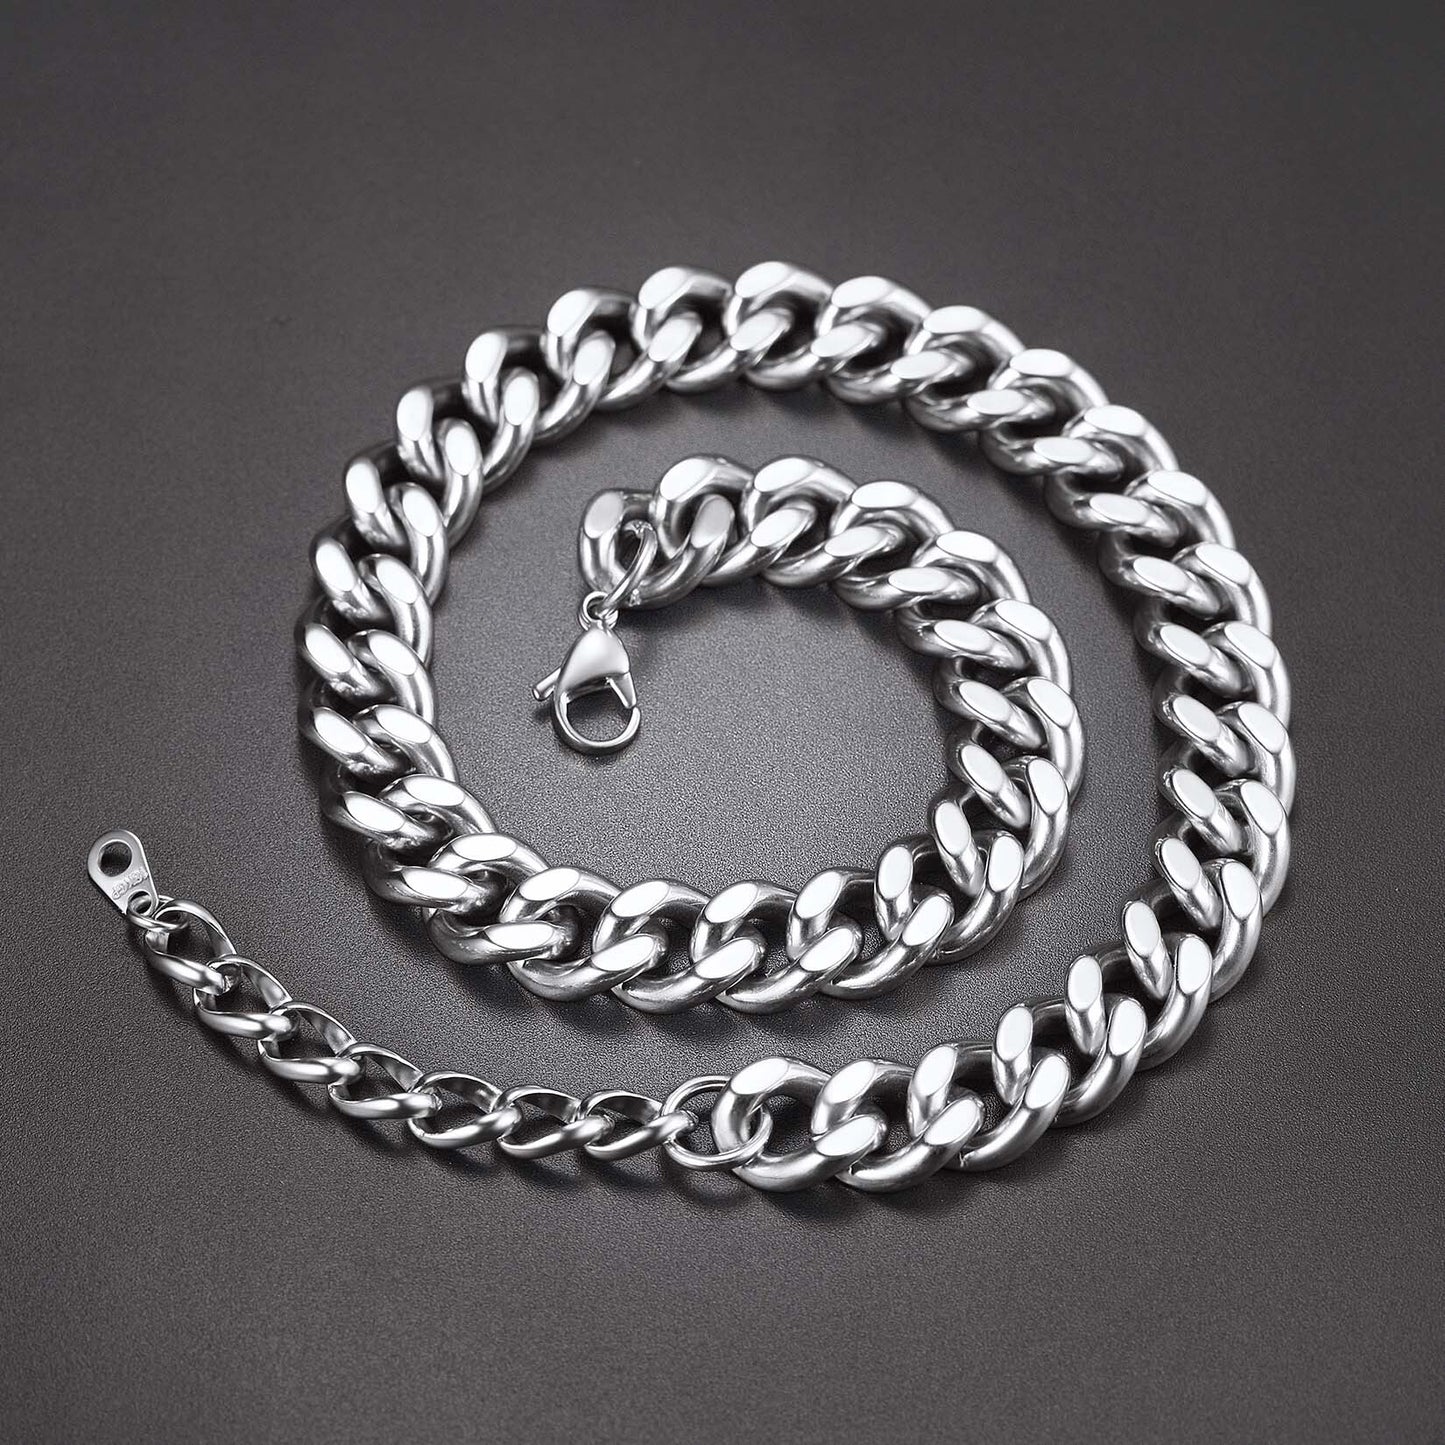 Mens Necklace Cuban Chain Choker 12mm 14 inch Stainless Steel Choker Neck Chains for Men